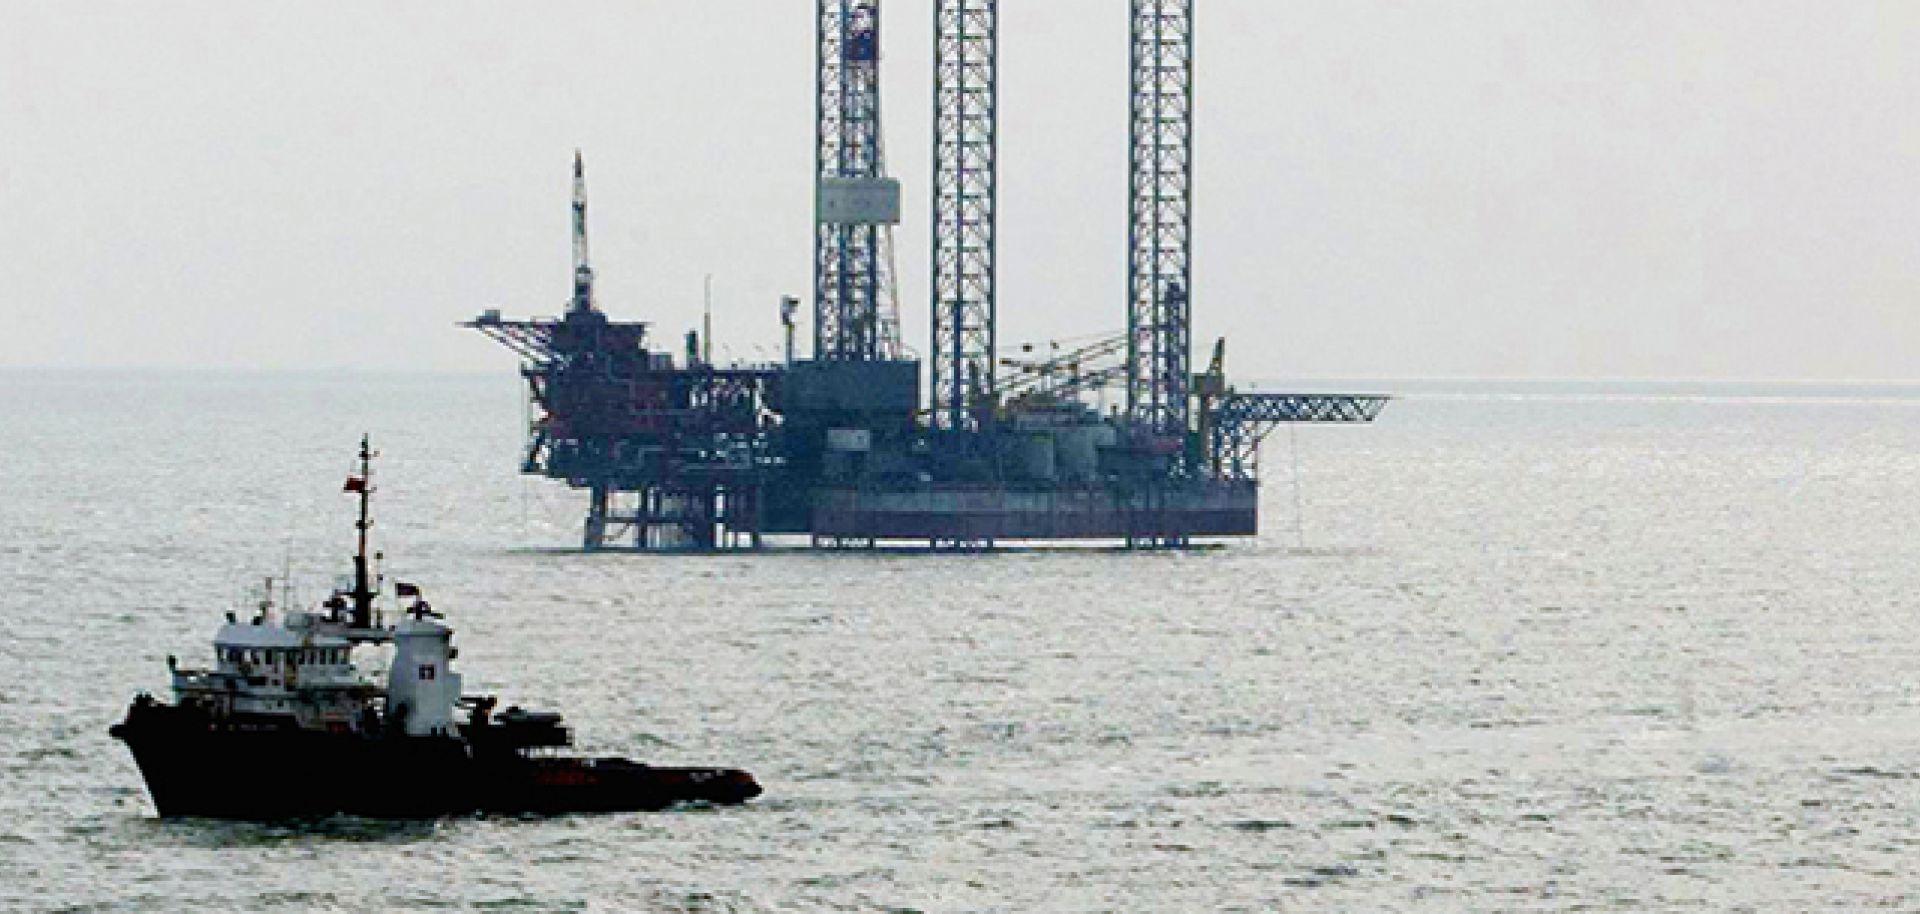 A China National Offshore Oil Corp. oil rig in the Bohai Sea off China's northeastern coast.